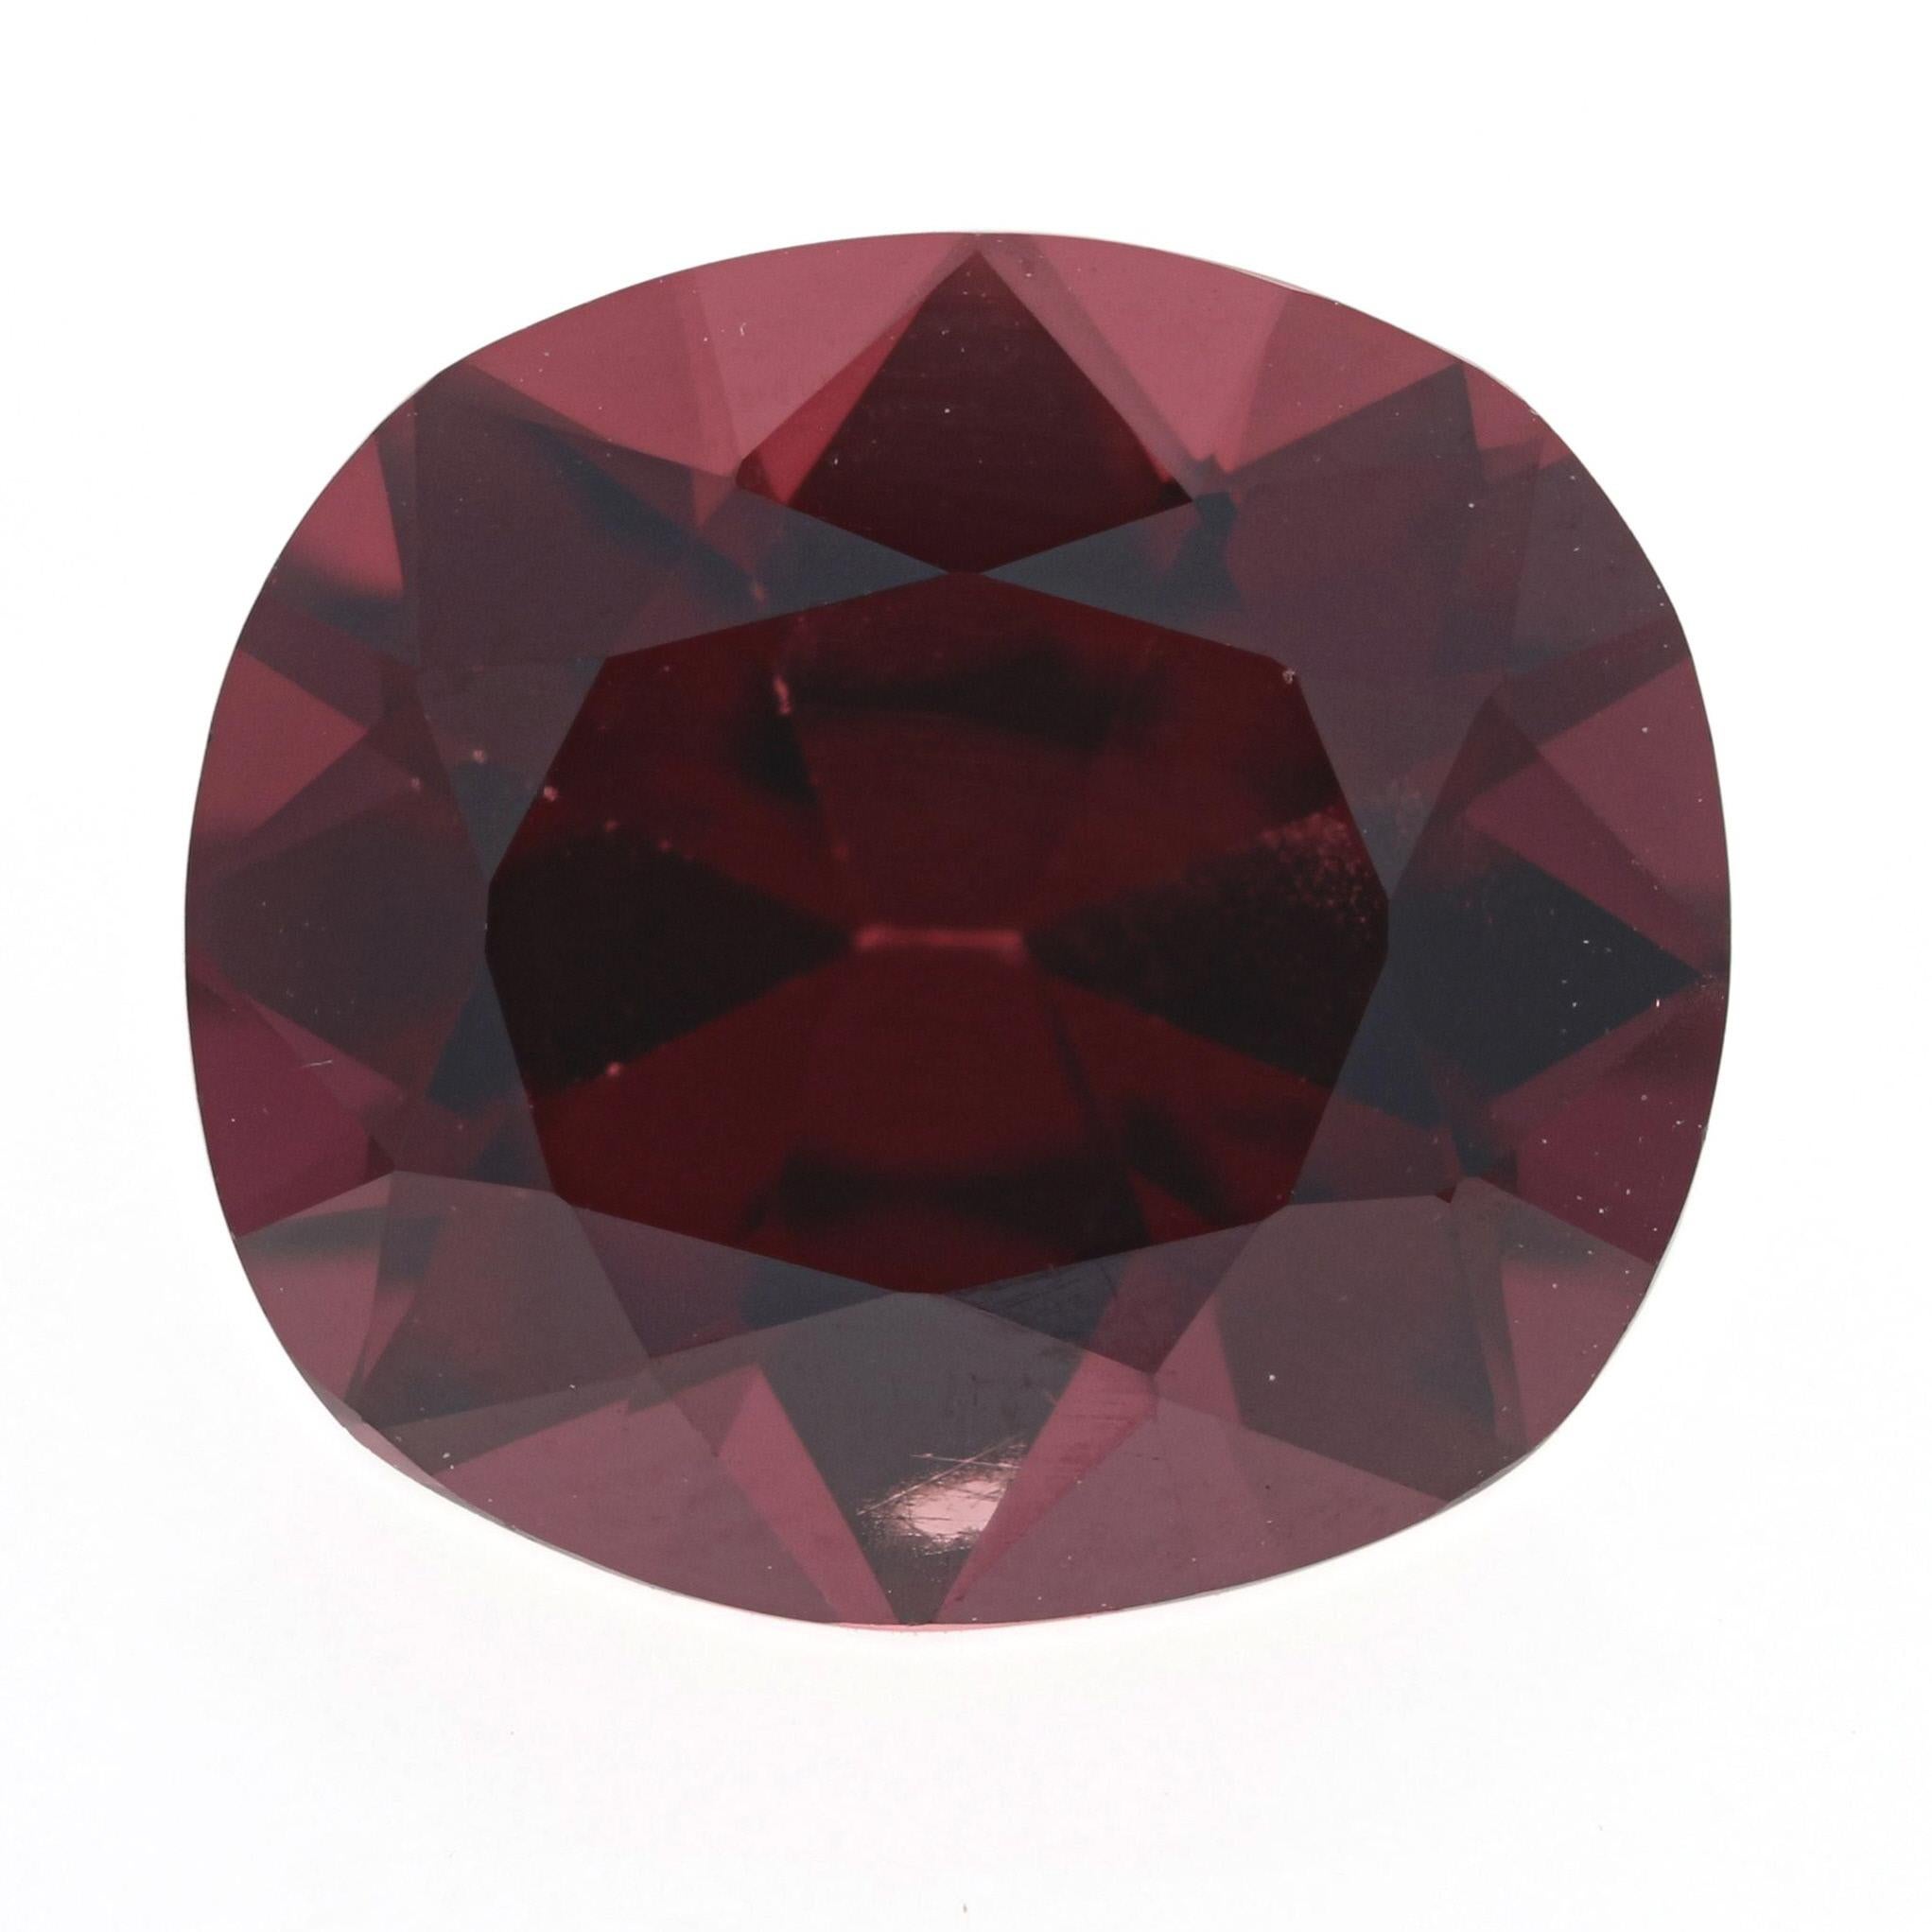 Women's or Men's Loose Spinel, Cushion Cut 5.04 Carat Red Solitaire For Sale